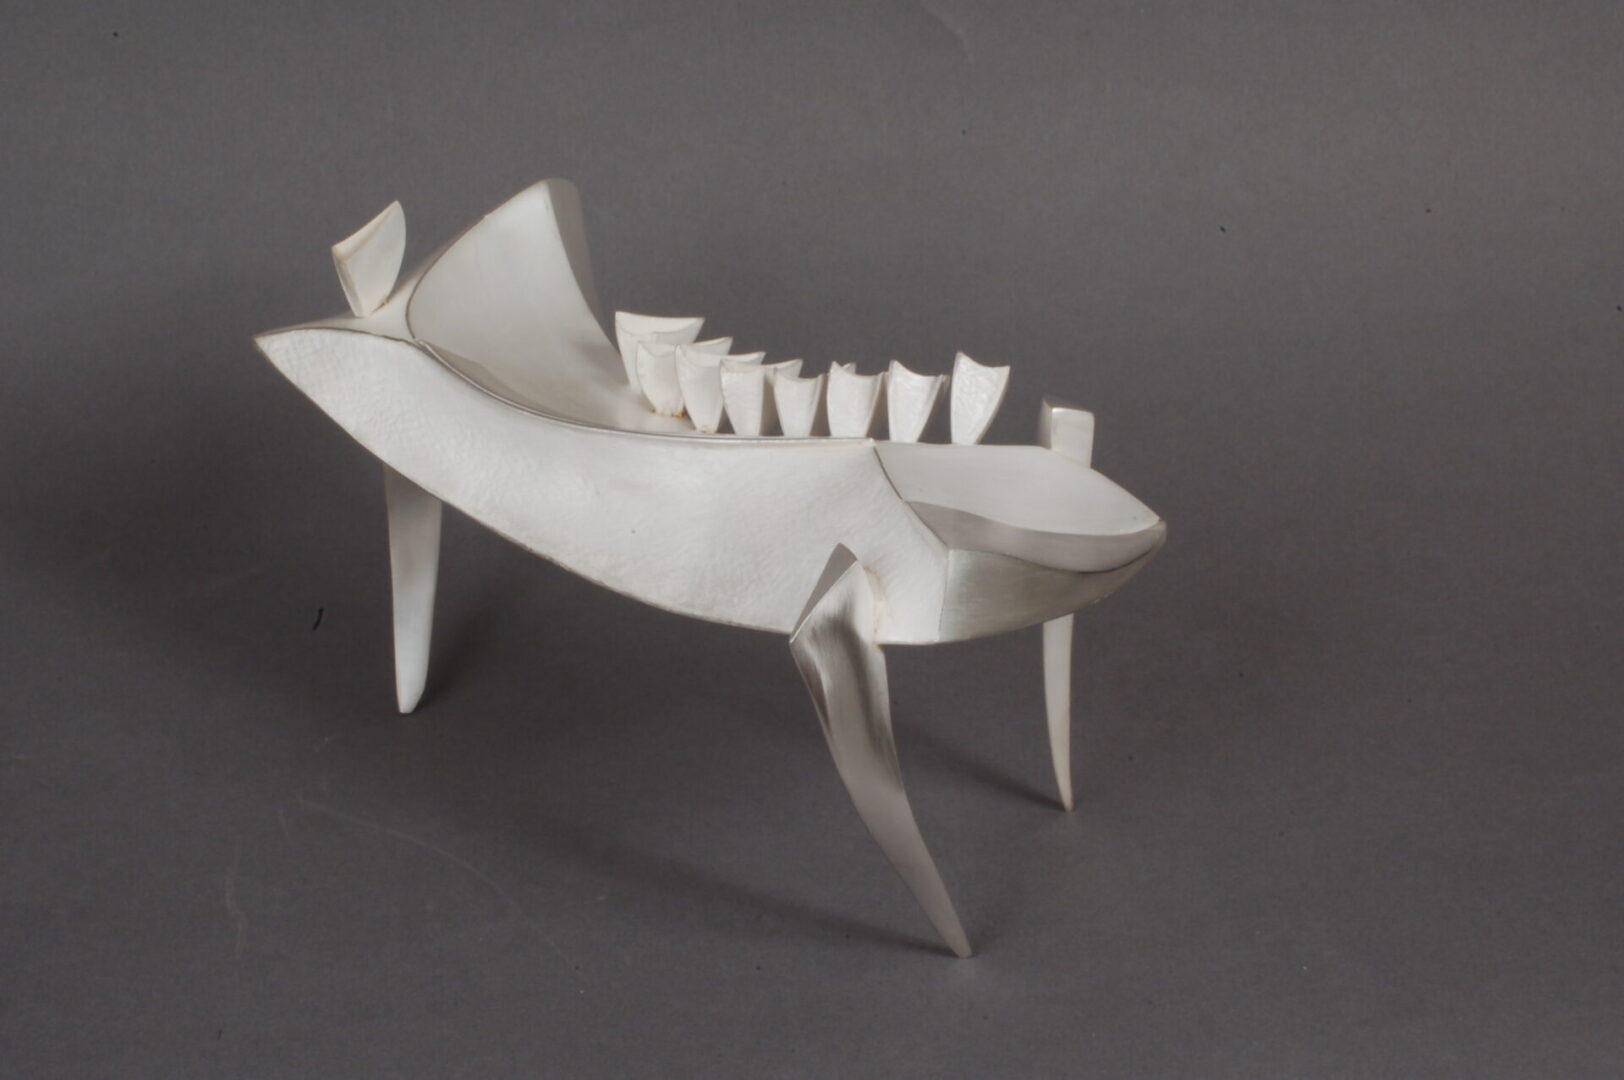 A fish sculpture on a grey background by Ira Sherman.